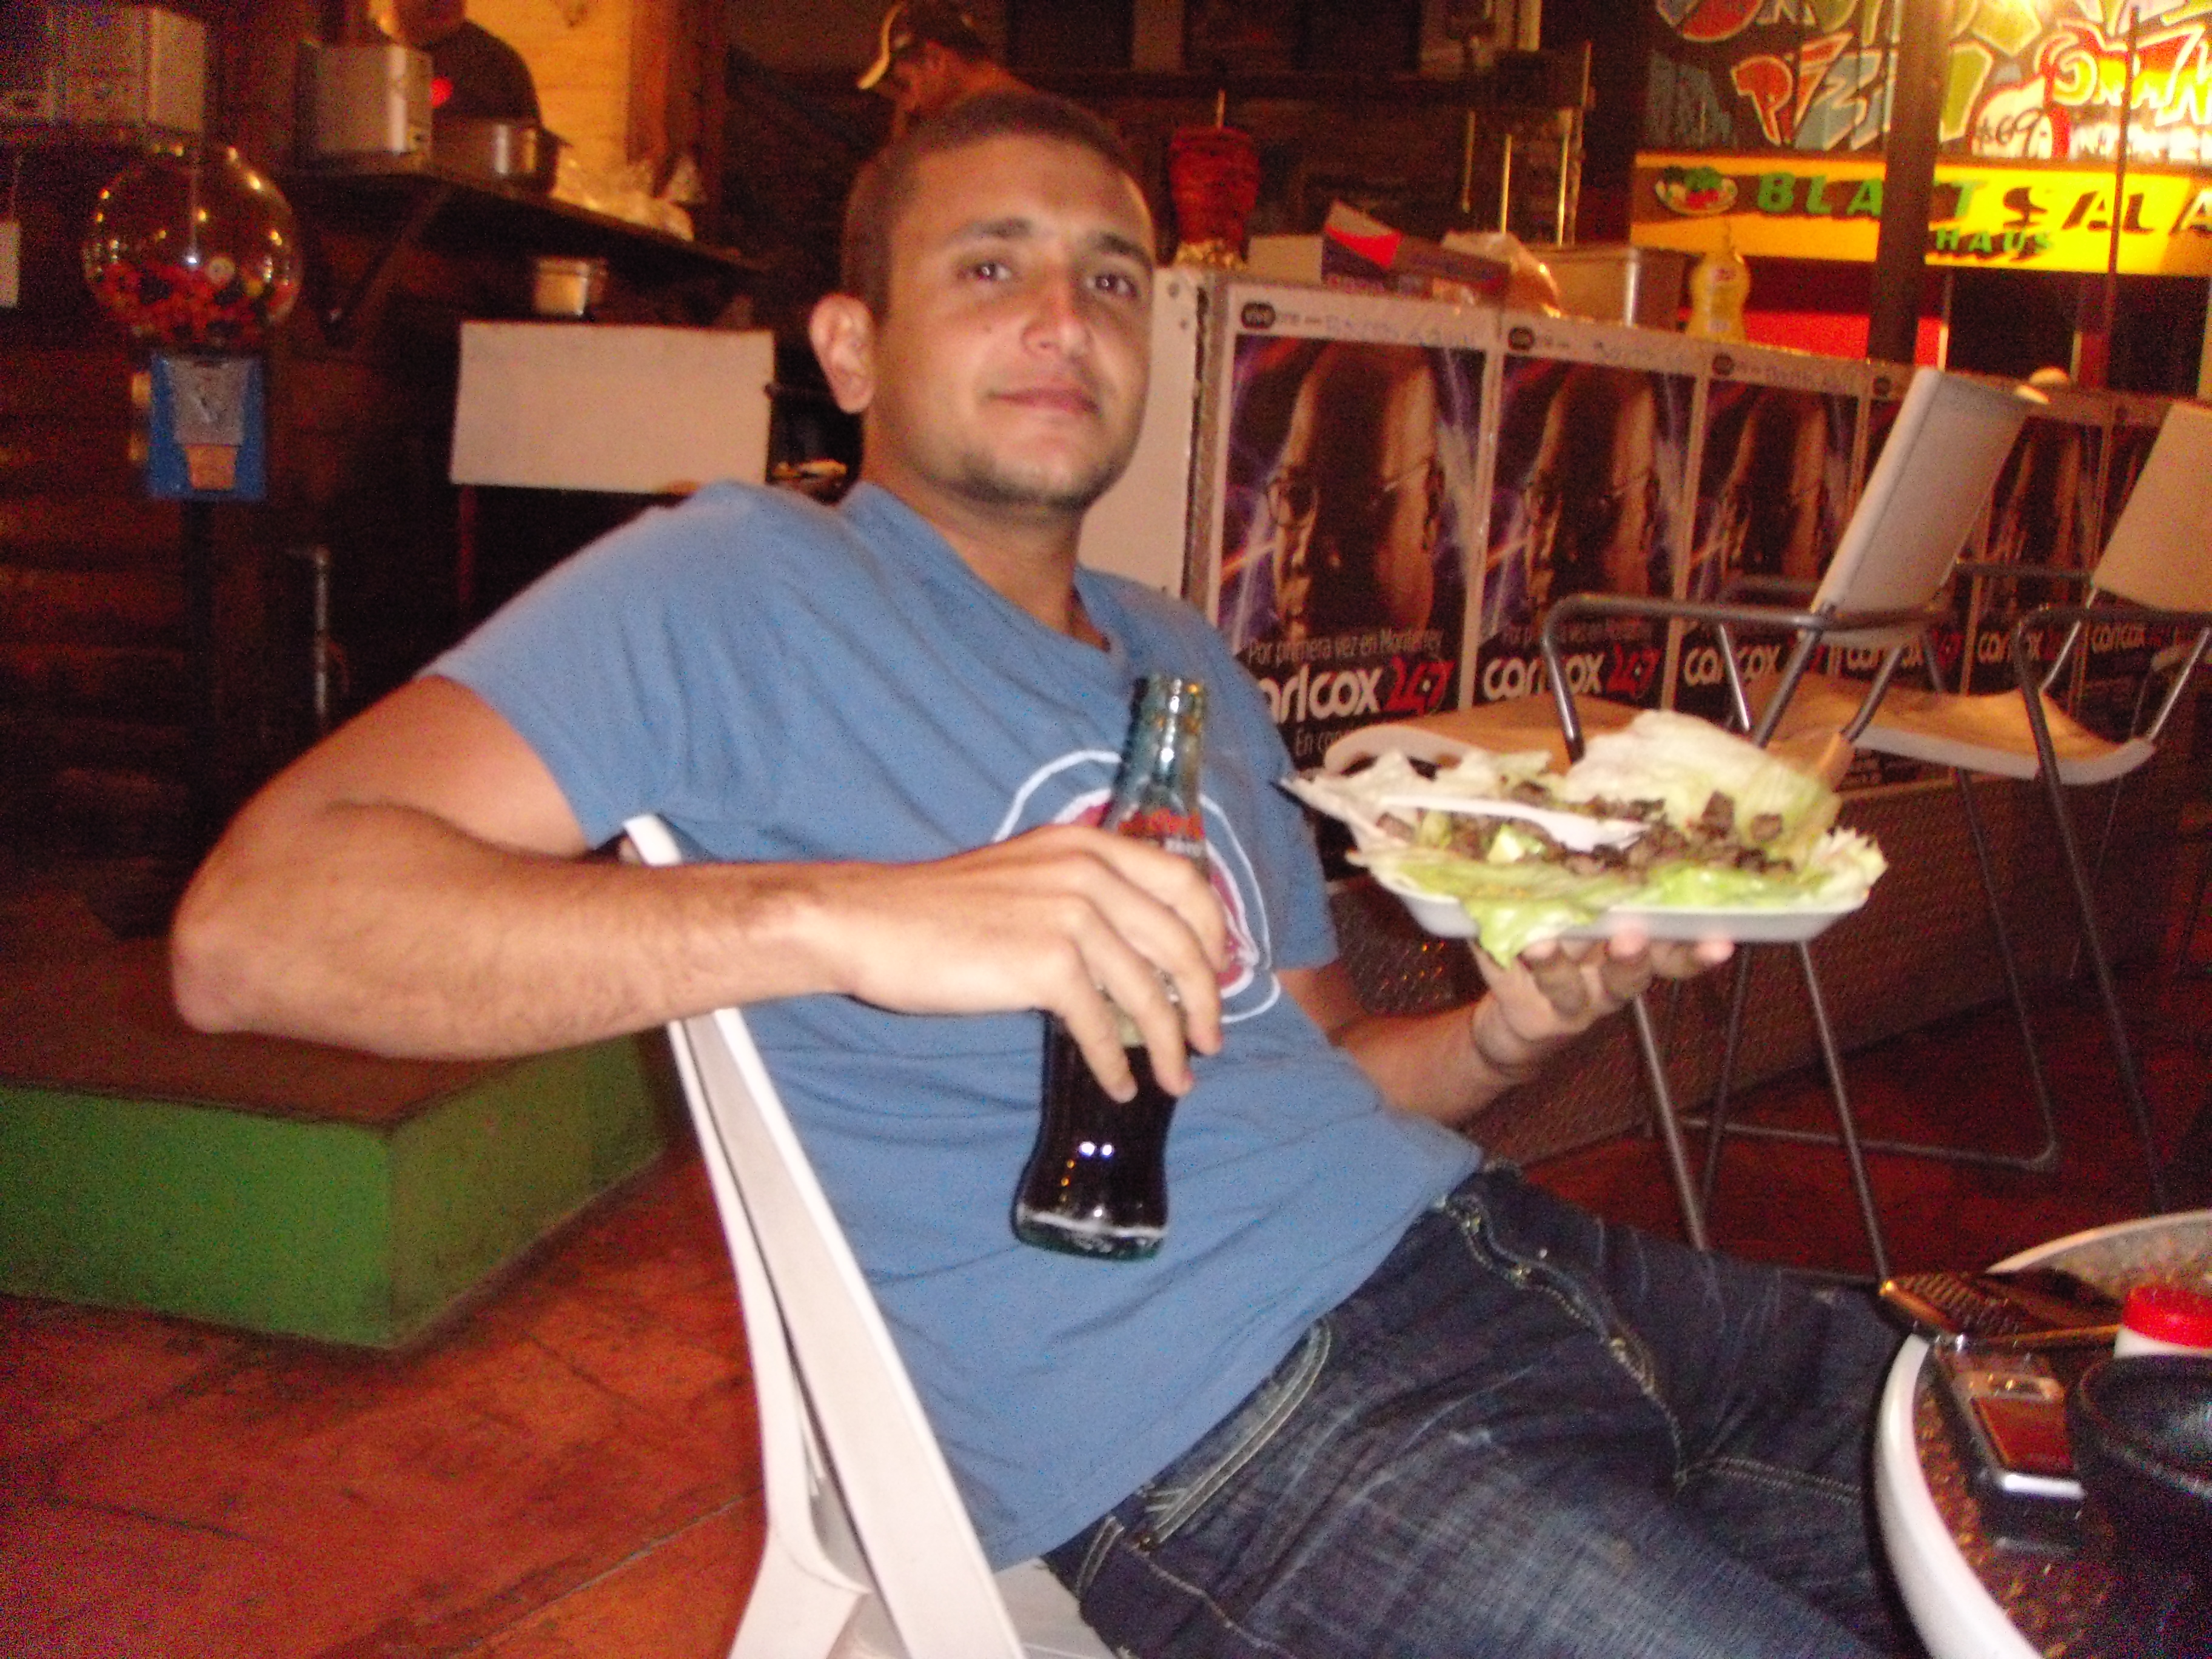 a man sitting in a chair holding a plate of food and a bottle